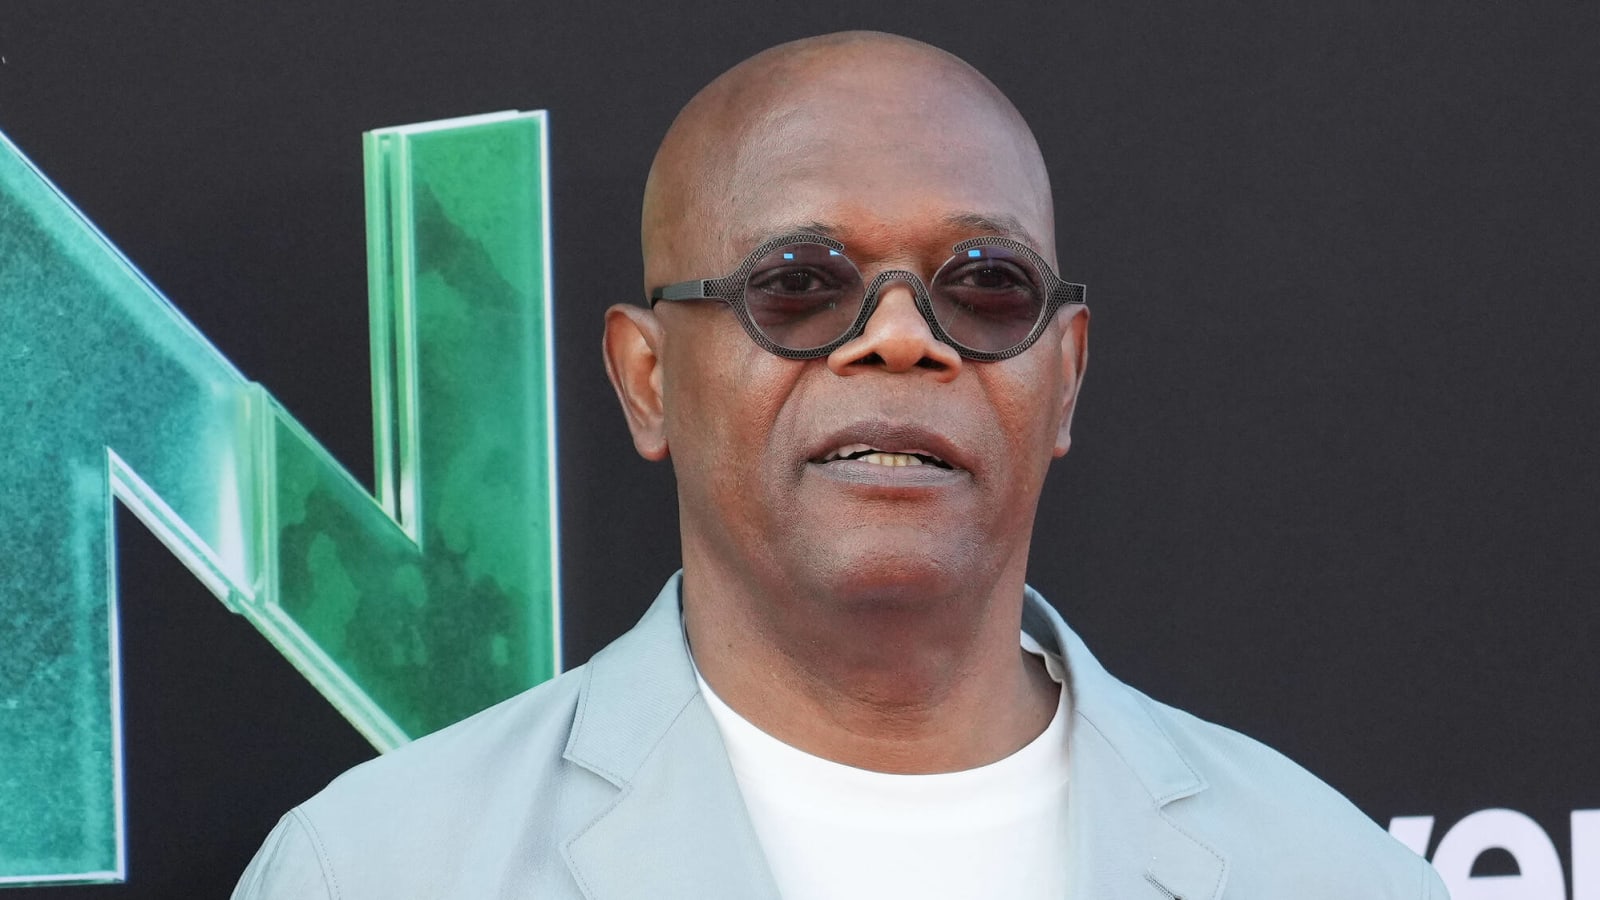 Review: Samuel L. Jackson is ready for his close-up in character-driven ‘Secret Invasion’